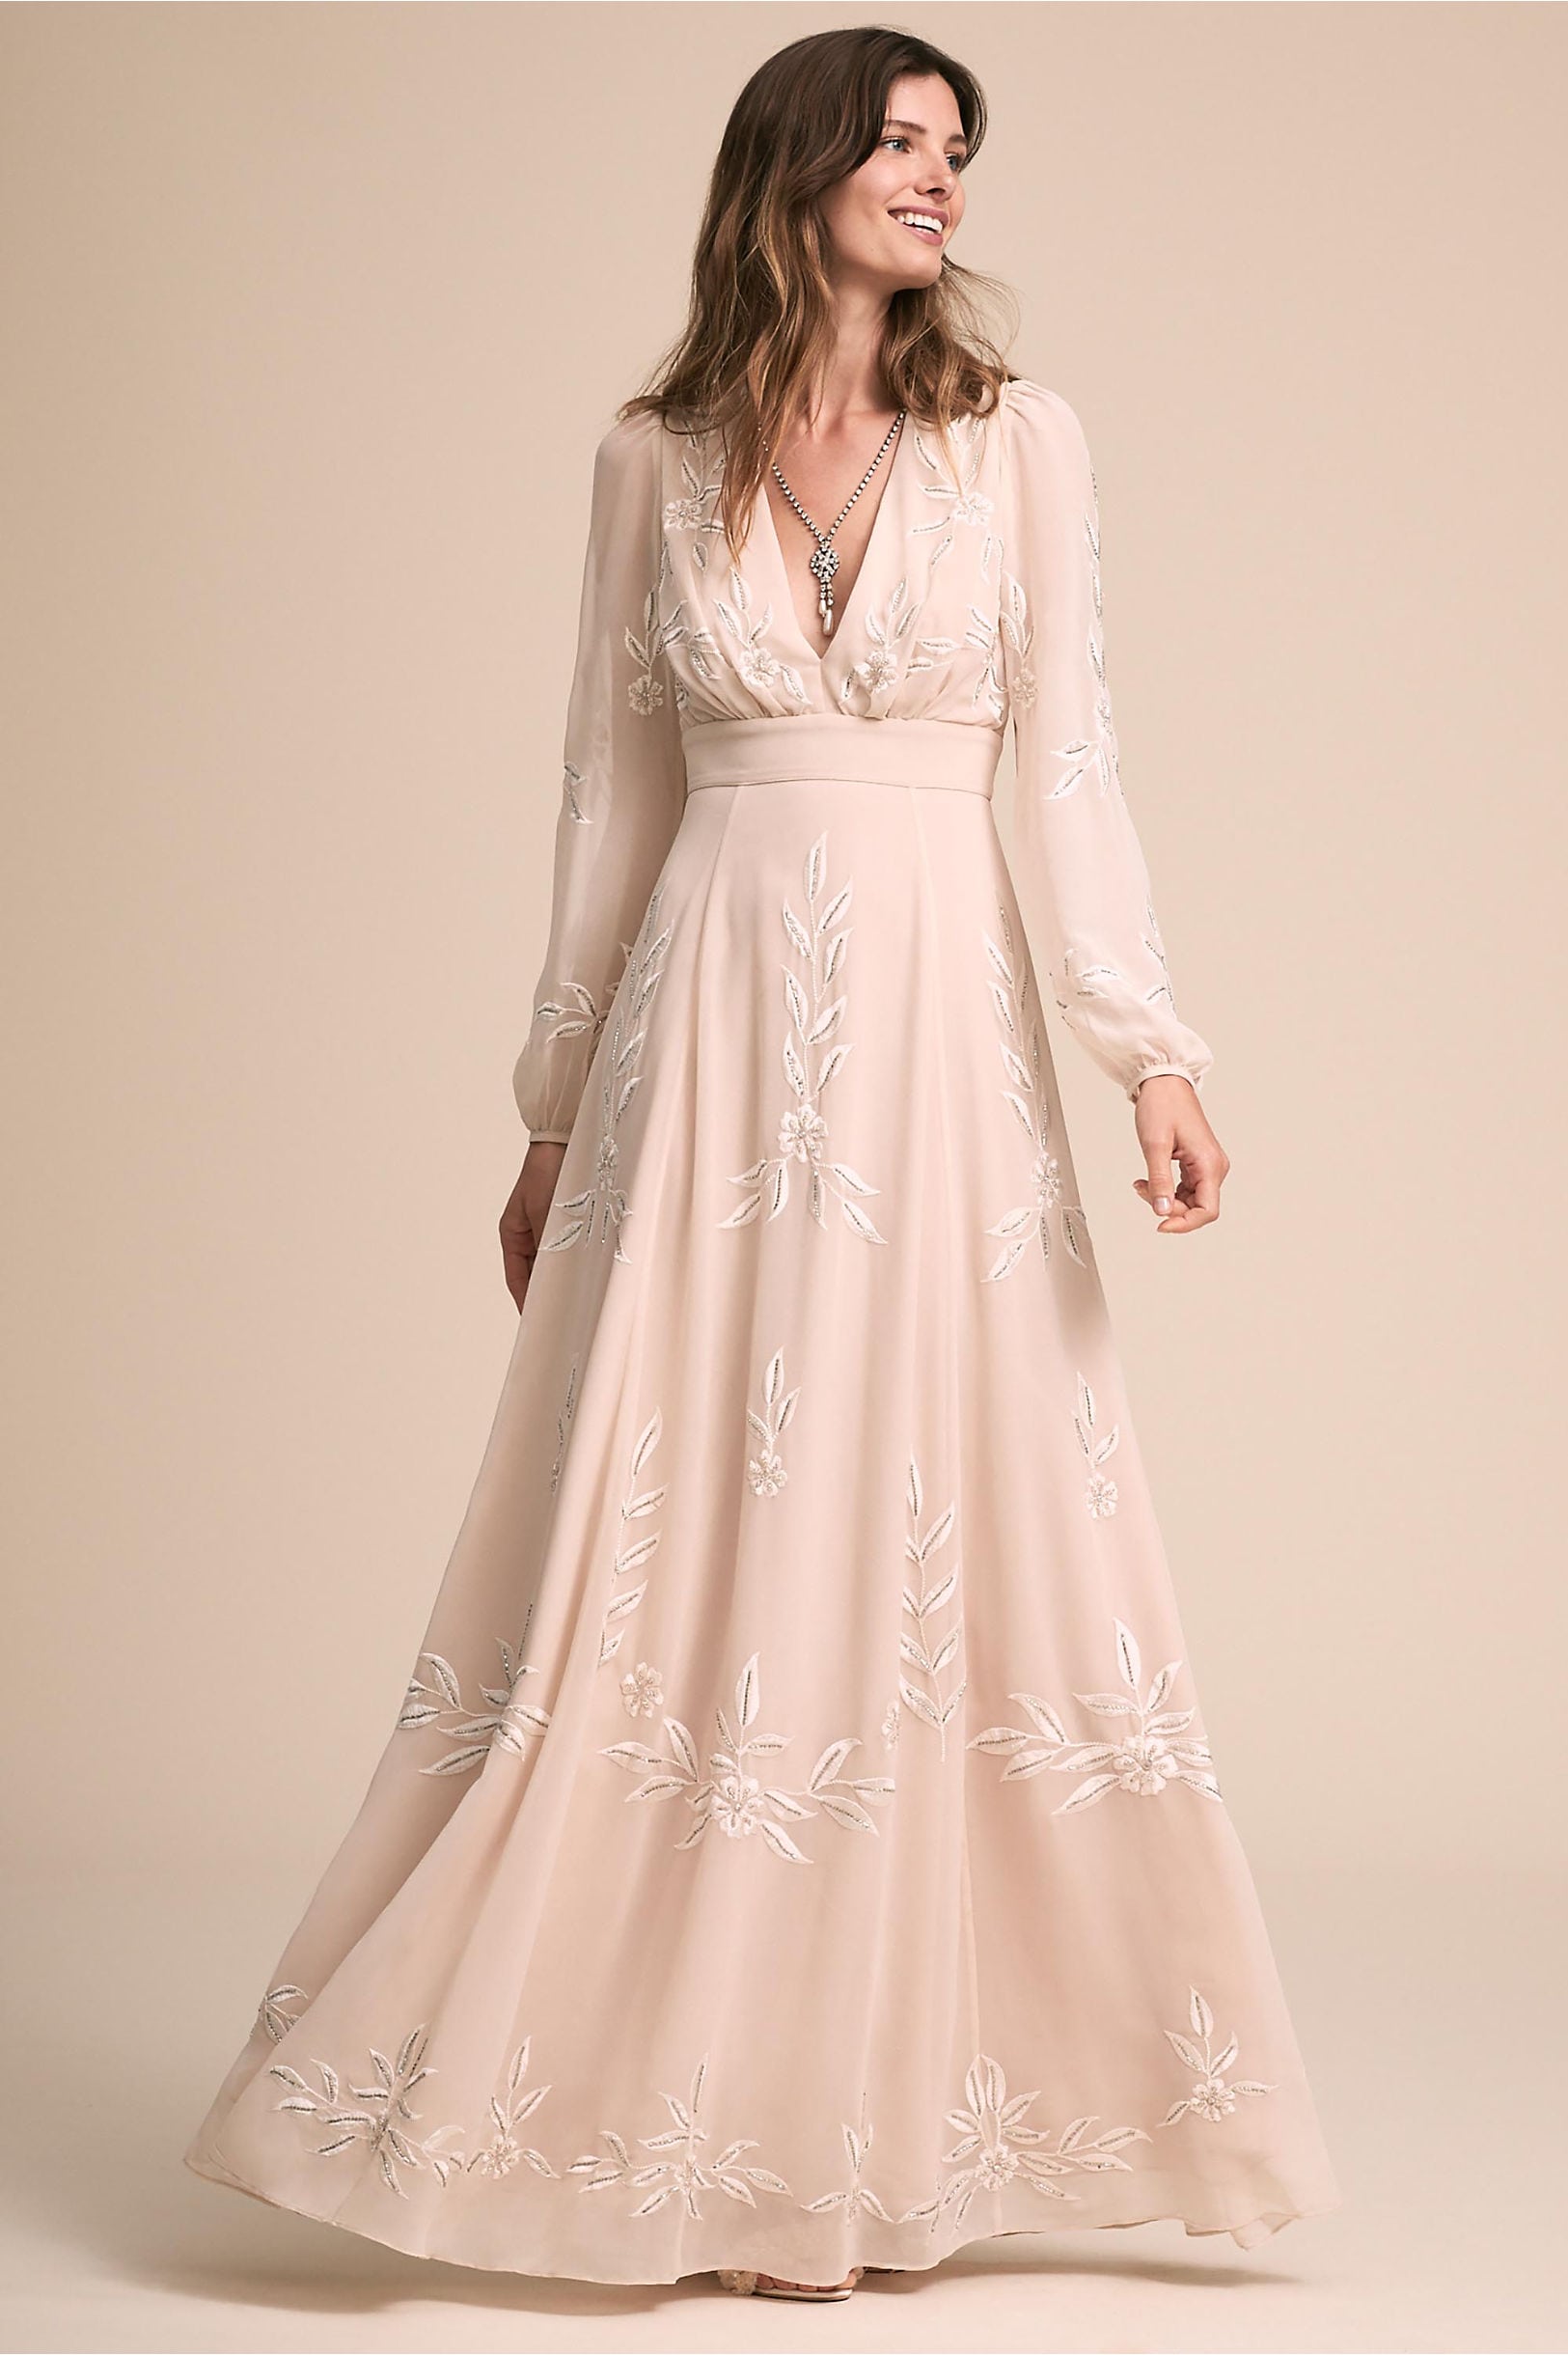 Belize Dress from BHLDN: full length deep v blush dress with flowing skirt with embroidery with long sleeves